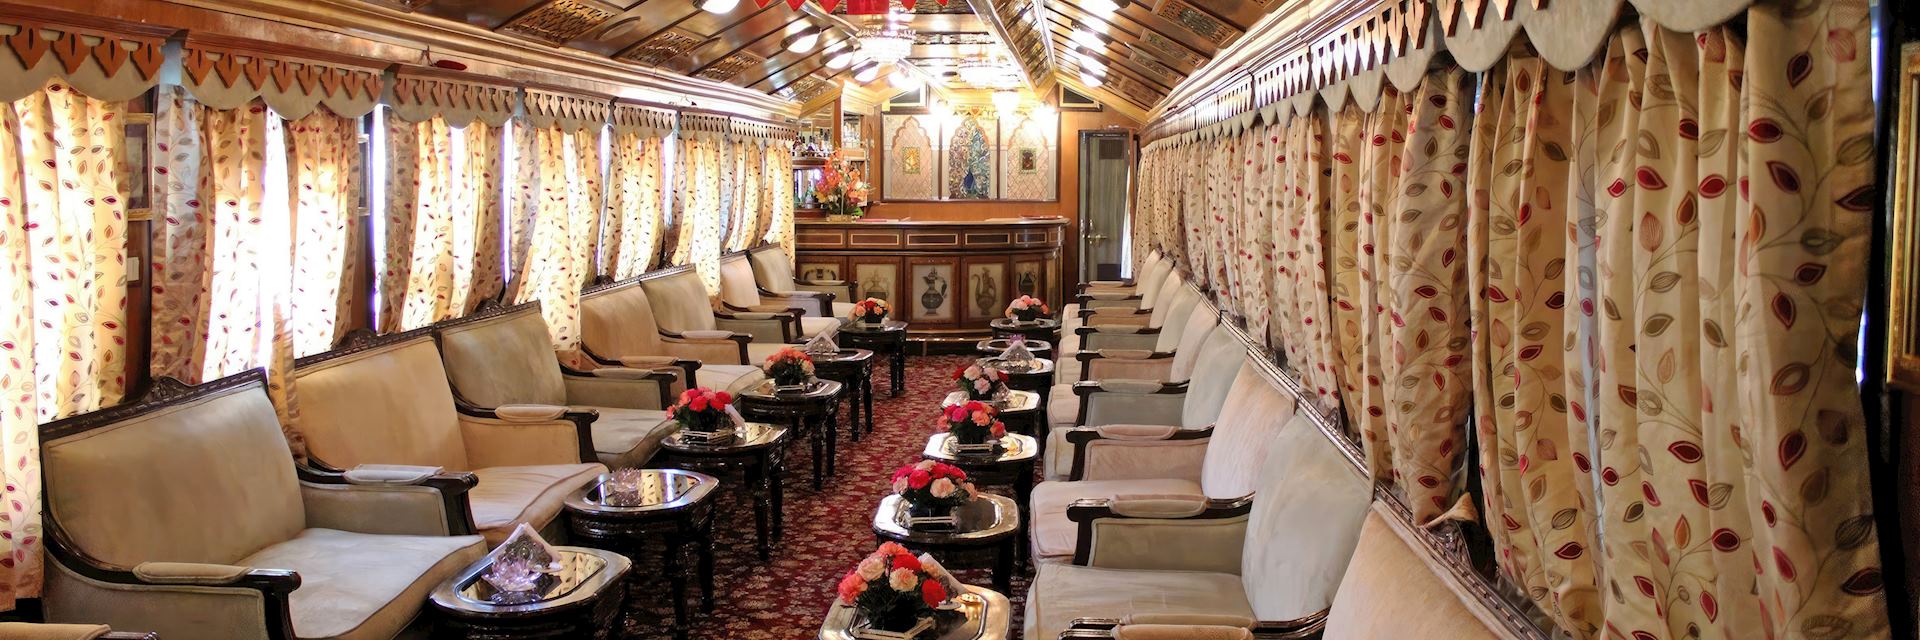 Palace on Wheels carriage